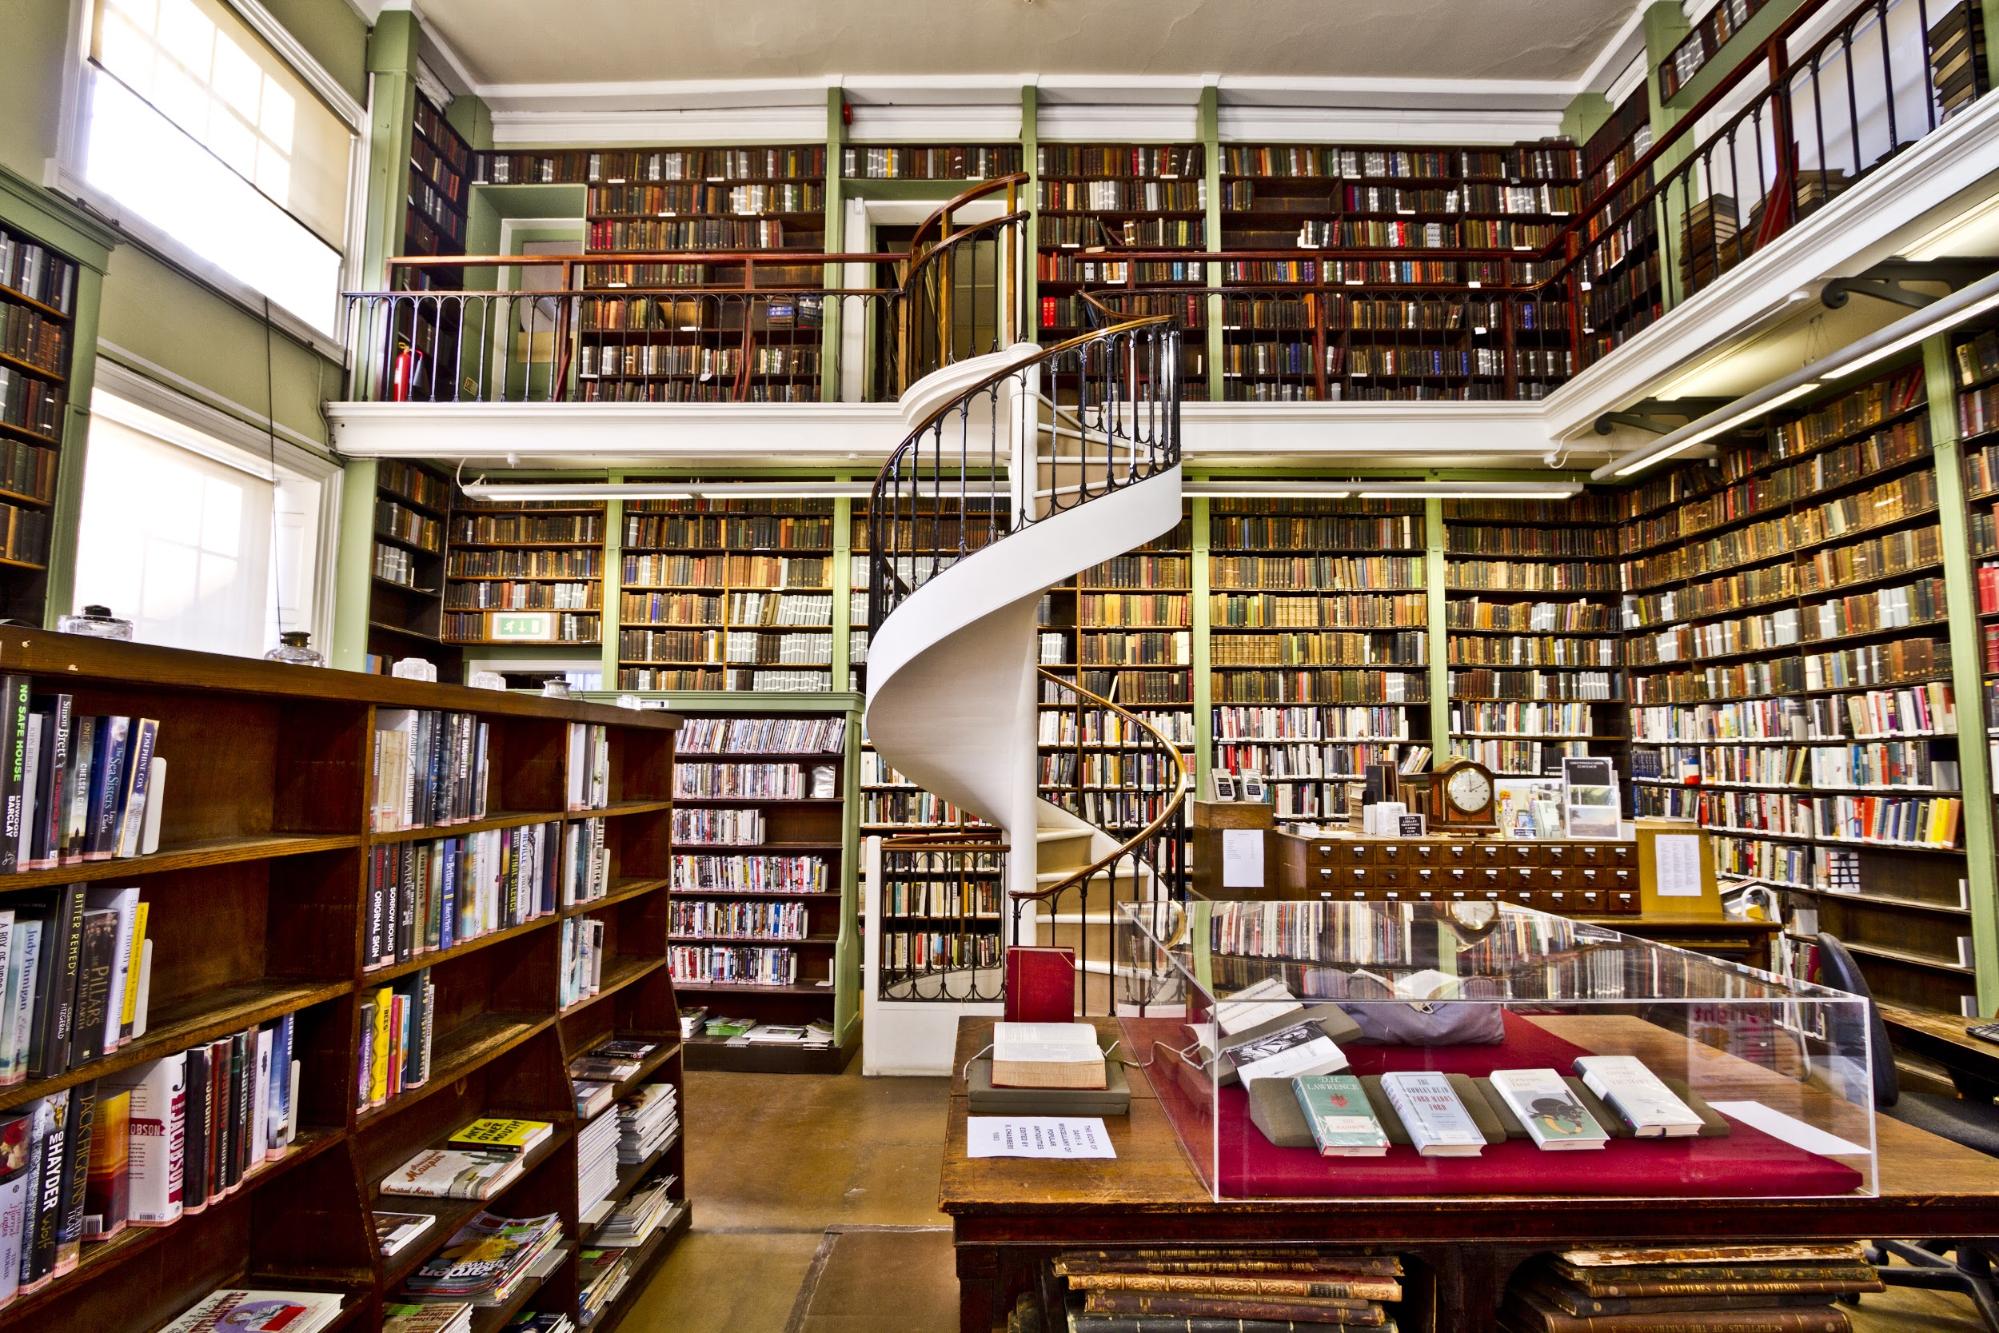 If you can afford the £120 annual subscription, you can get plenty of work done at The Leeds Library in Yorkshire, England, a private subscription library. Photograph courtesy Michael D. Bekwith.